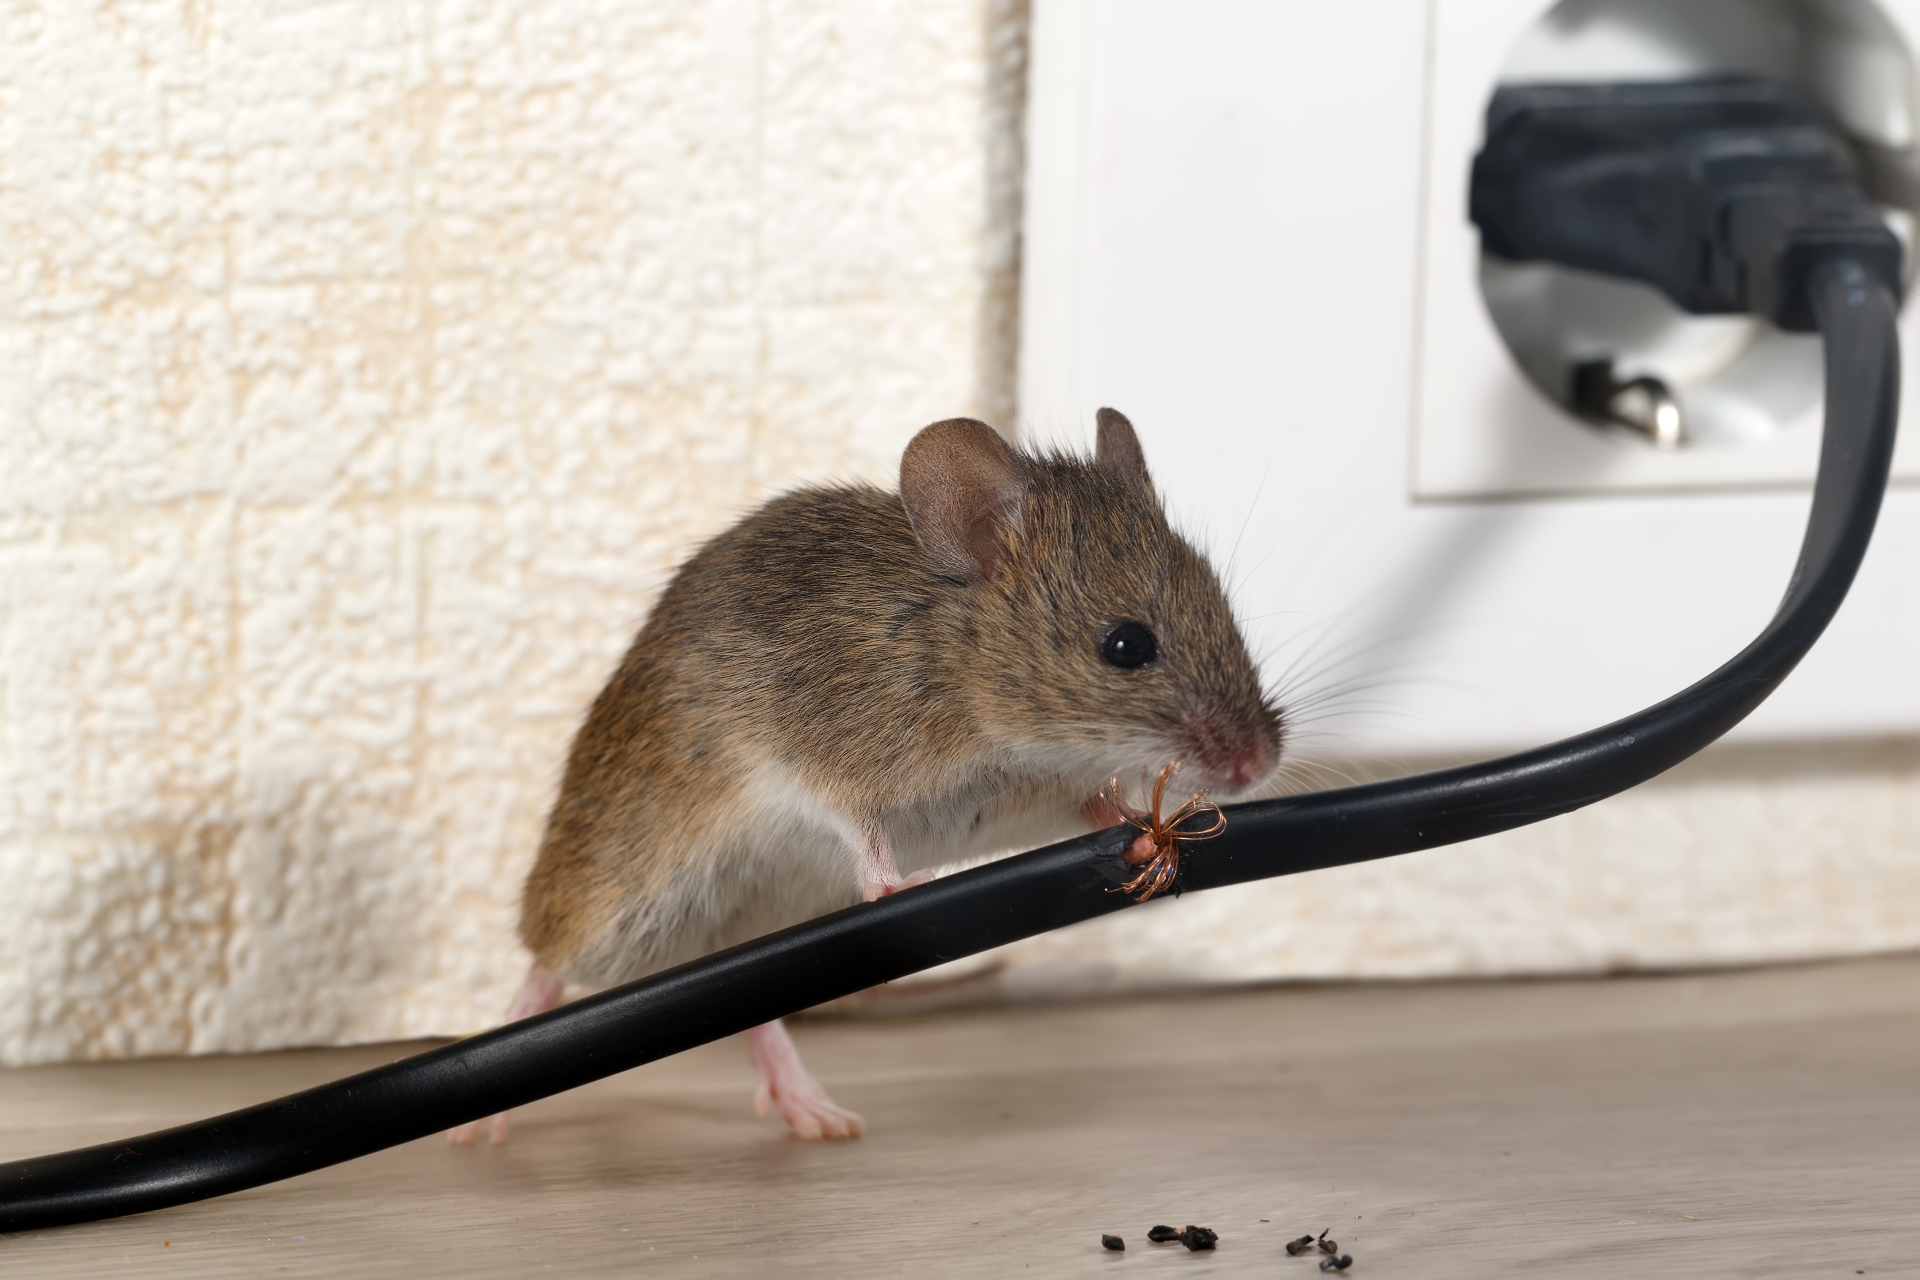 Mice Infestation, Pest Control in Abbey Wood, SE2. Call Now 020 8166 9746